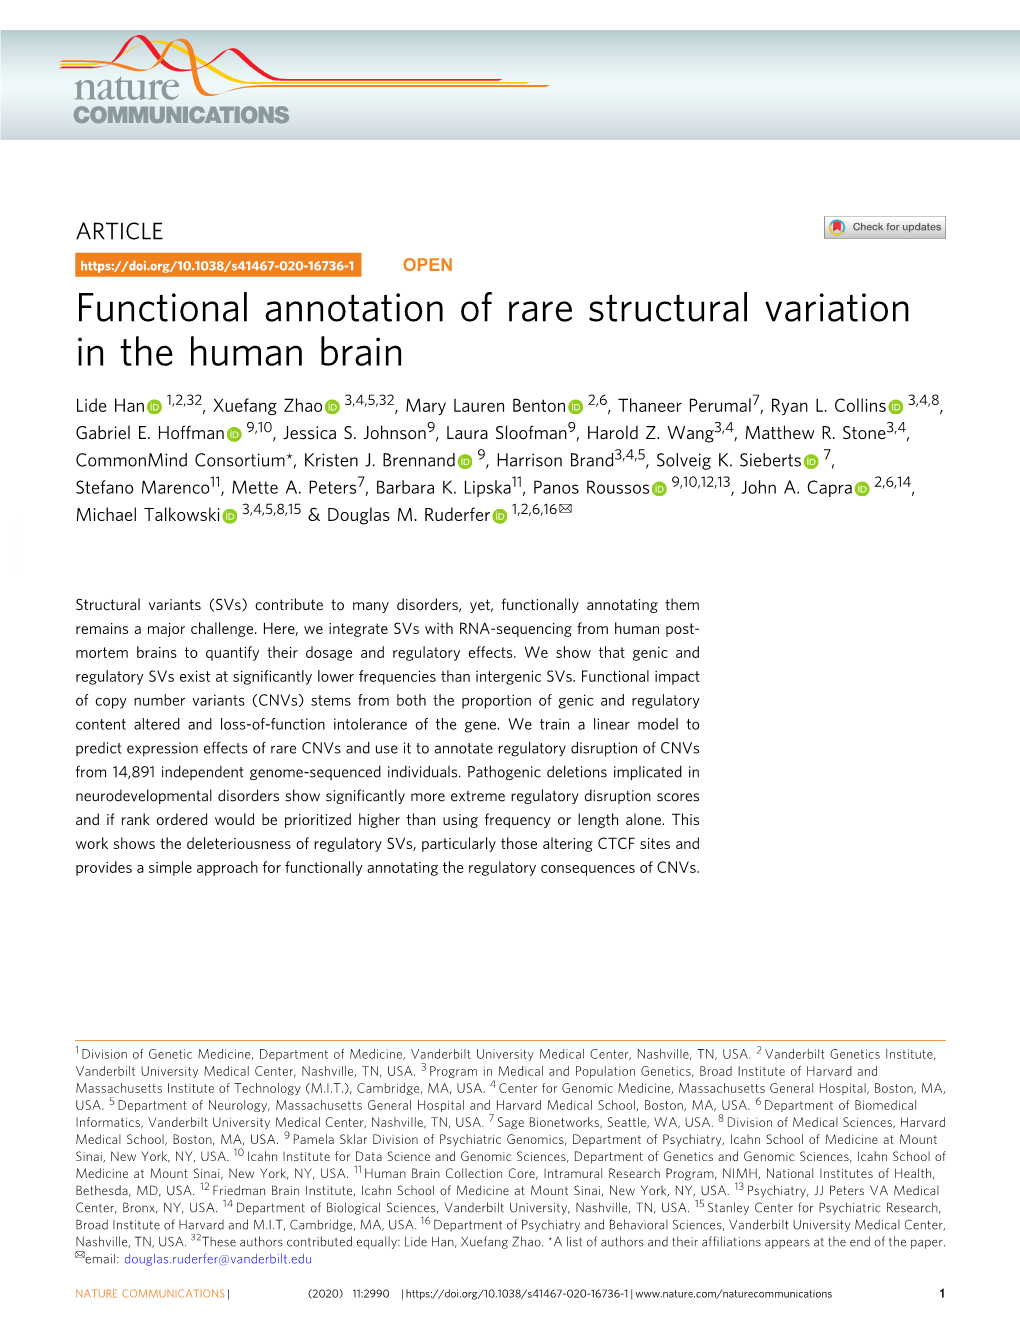 Functional Annotation of Rare Structural Variation in the Human Brain